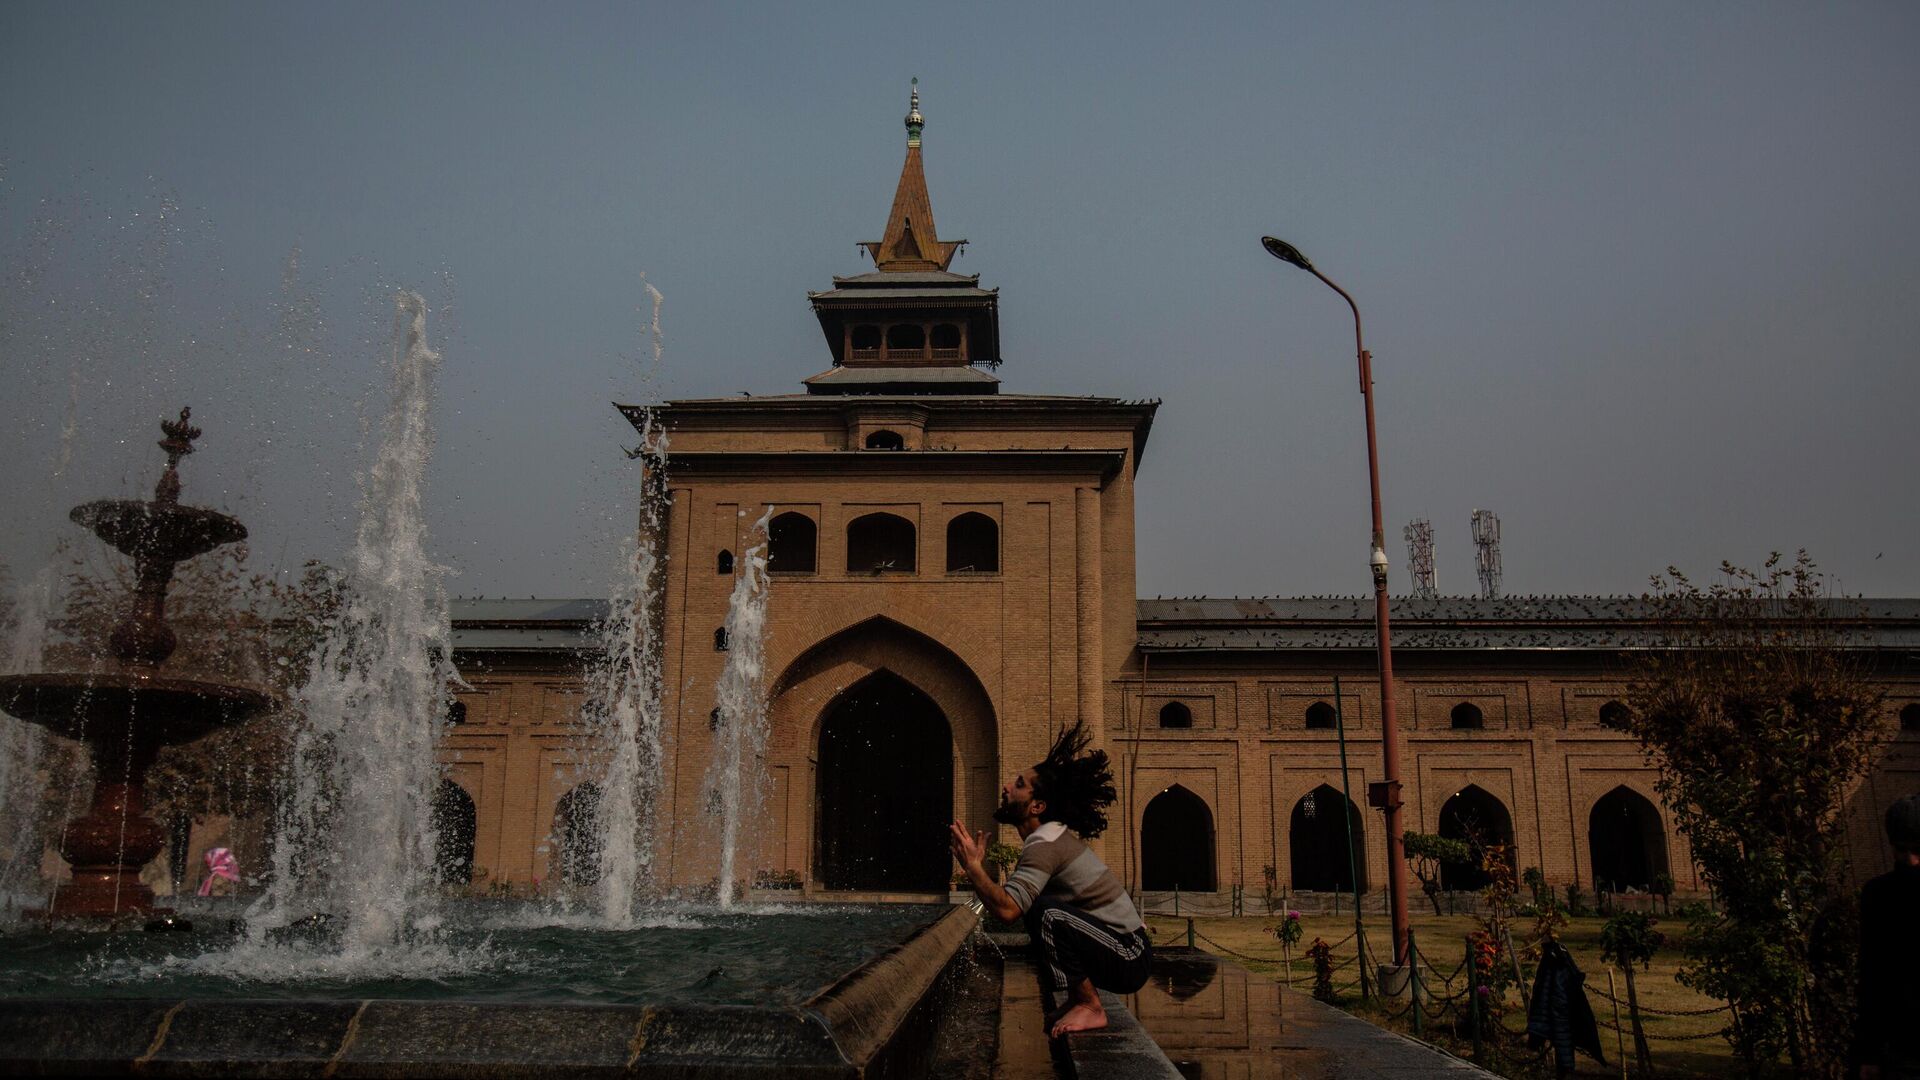 A Kashmiri man performs ablution before prayers outside the Jamia Masjid, or the grand mosque in Srinagar, Indian controlled Kashmir, Nov. 13, 2021. The mosque has remained out of bounds to worshippers for prayers on Friday – the main day of worship in Islam. Indian authorities see it as a trouble spot, a nerve center for anti-India protests and clashes that challenge New Delhi’s sovereignty over disputed Kashmir. For Kashmiri Muslims it is a symbol of faith, a sacred place where they offer not just mandatory Friday prayers but also raise their voice for political rights. - Sputnik International, 1920, 09.04.2022